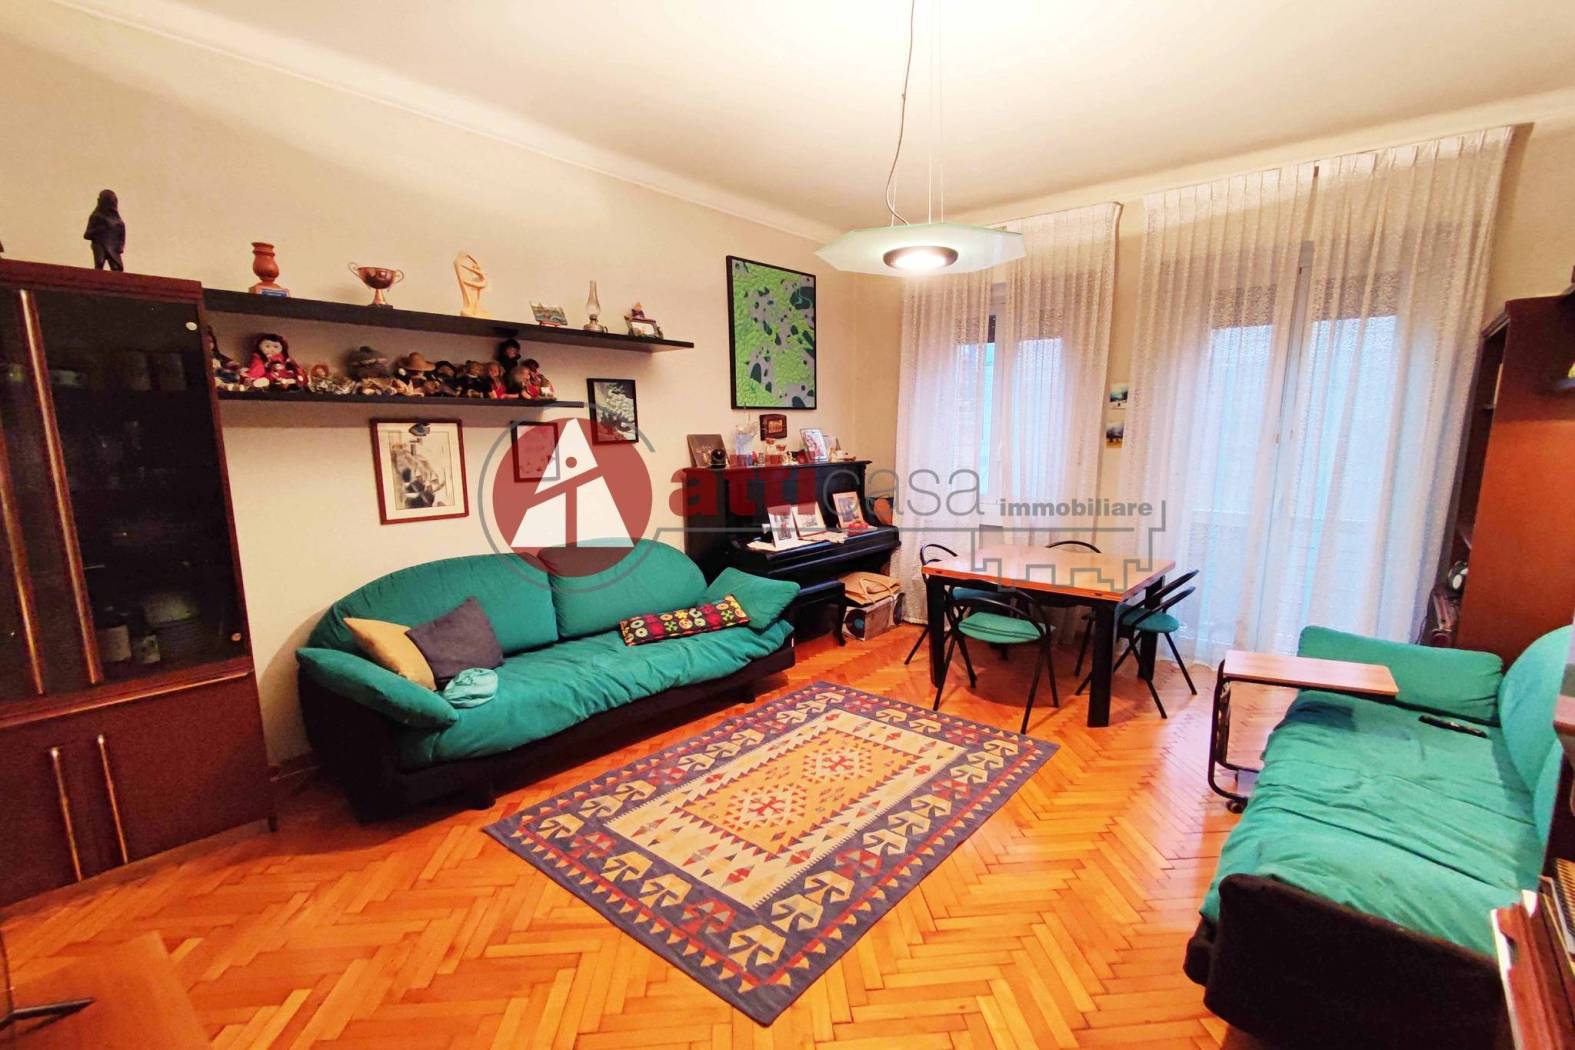 Apartments for sale in the province of Trieste - Immobiliare.it